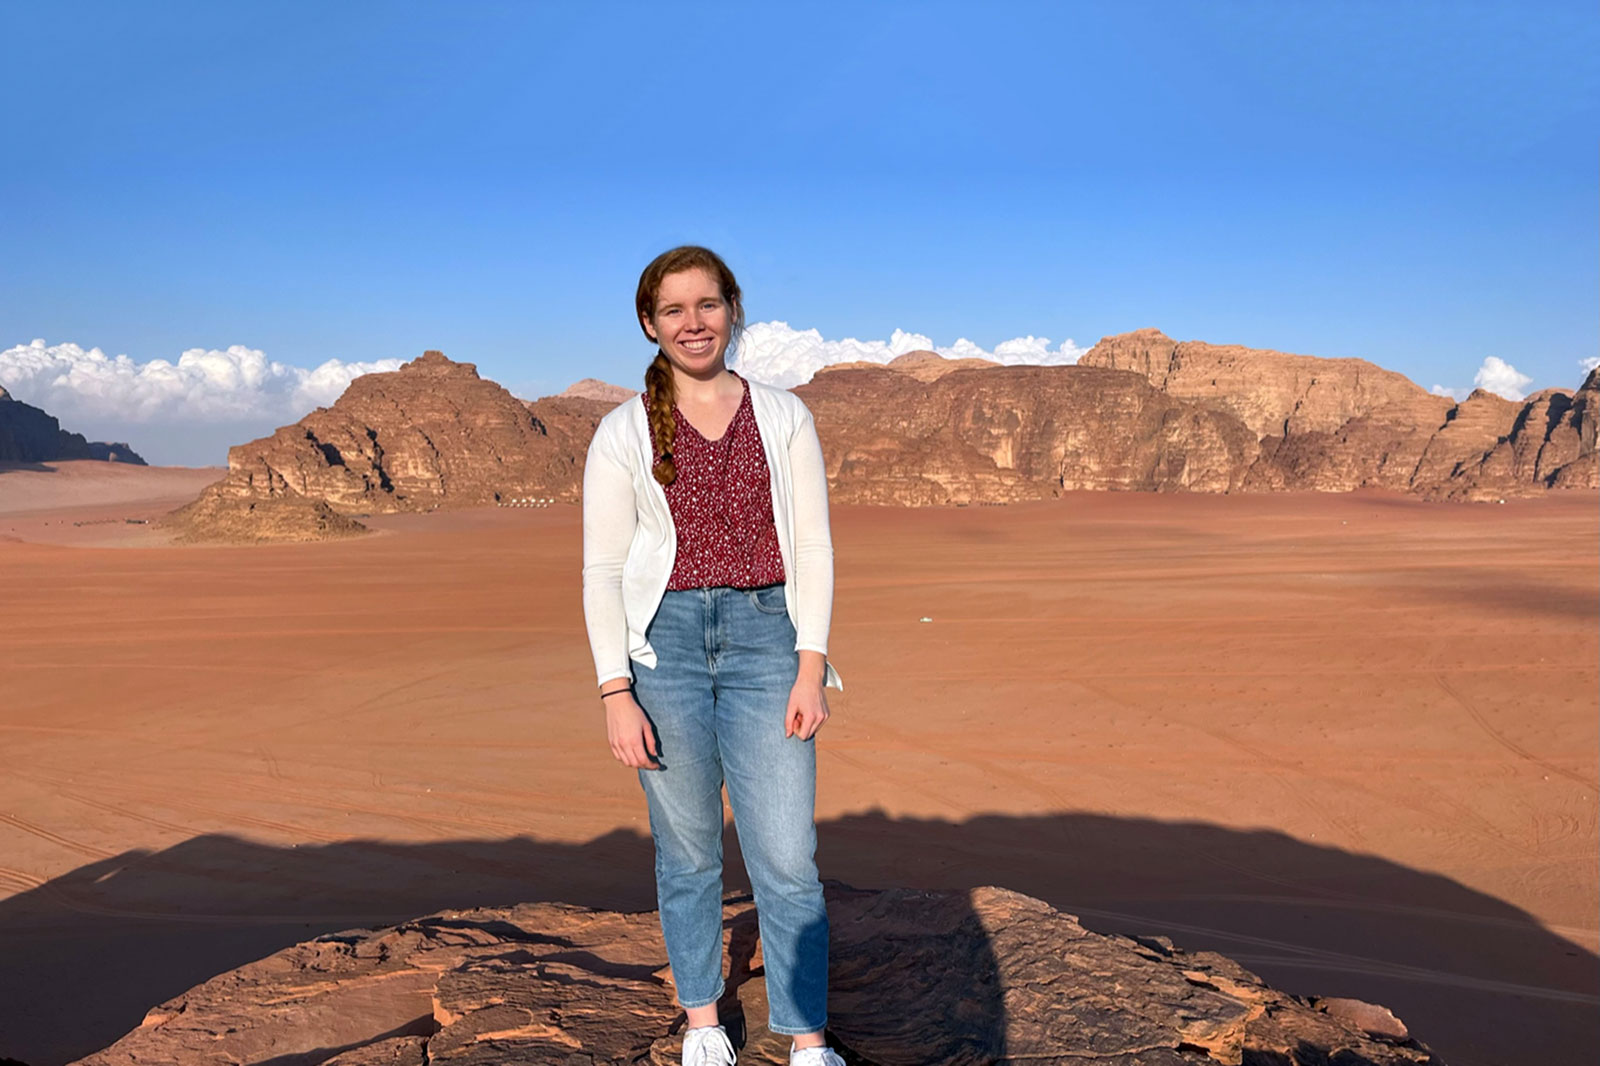 “Study Abroad at AUD and Explore the Middle East” by Colbee Cunningham